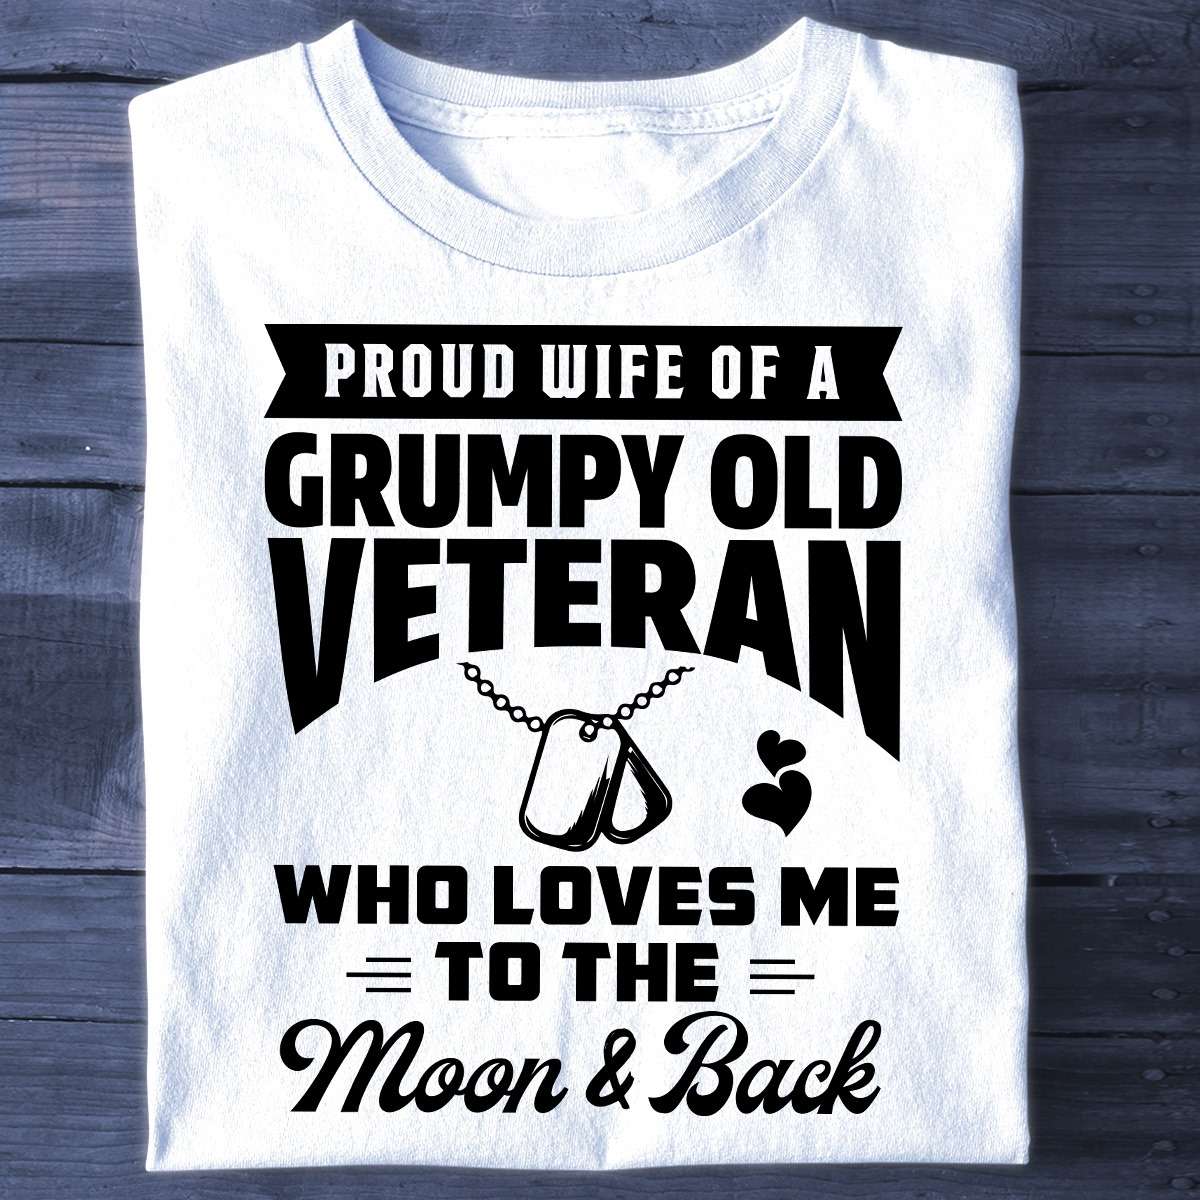 Proud wife of a grumpy old veteran who loevs me to the moon and back - Veteran's wife